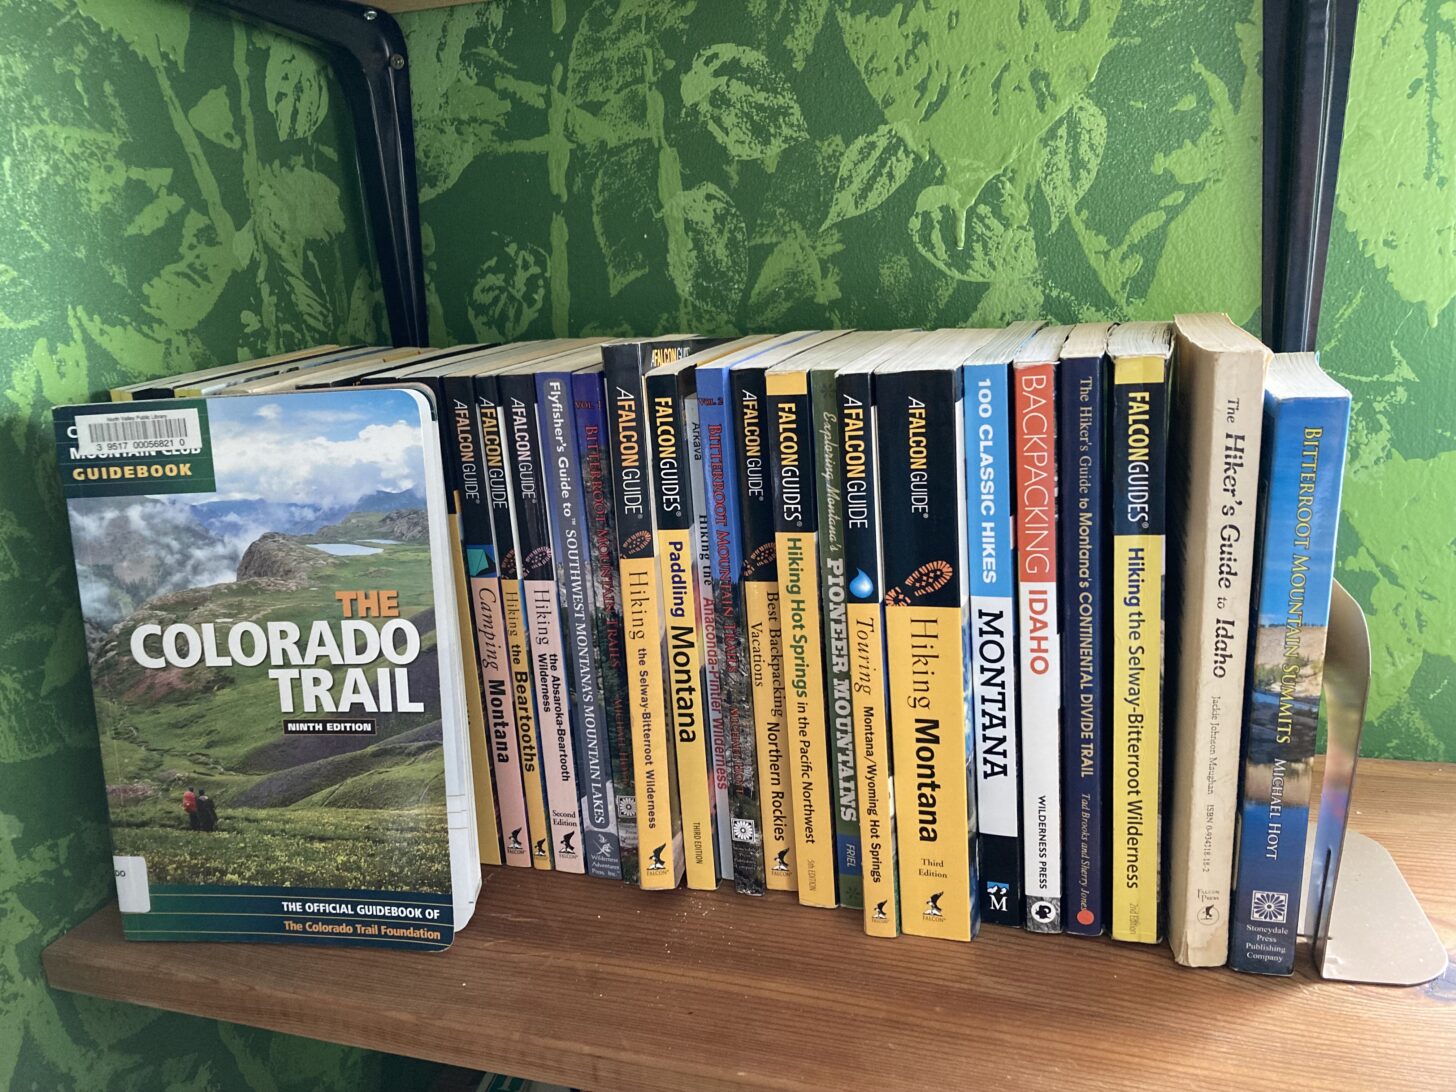 A guidebook for The Colorado Trail sits in front of several guidebooks for Montana and Idaho.